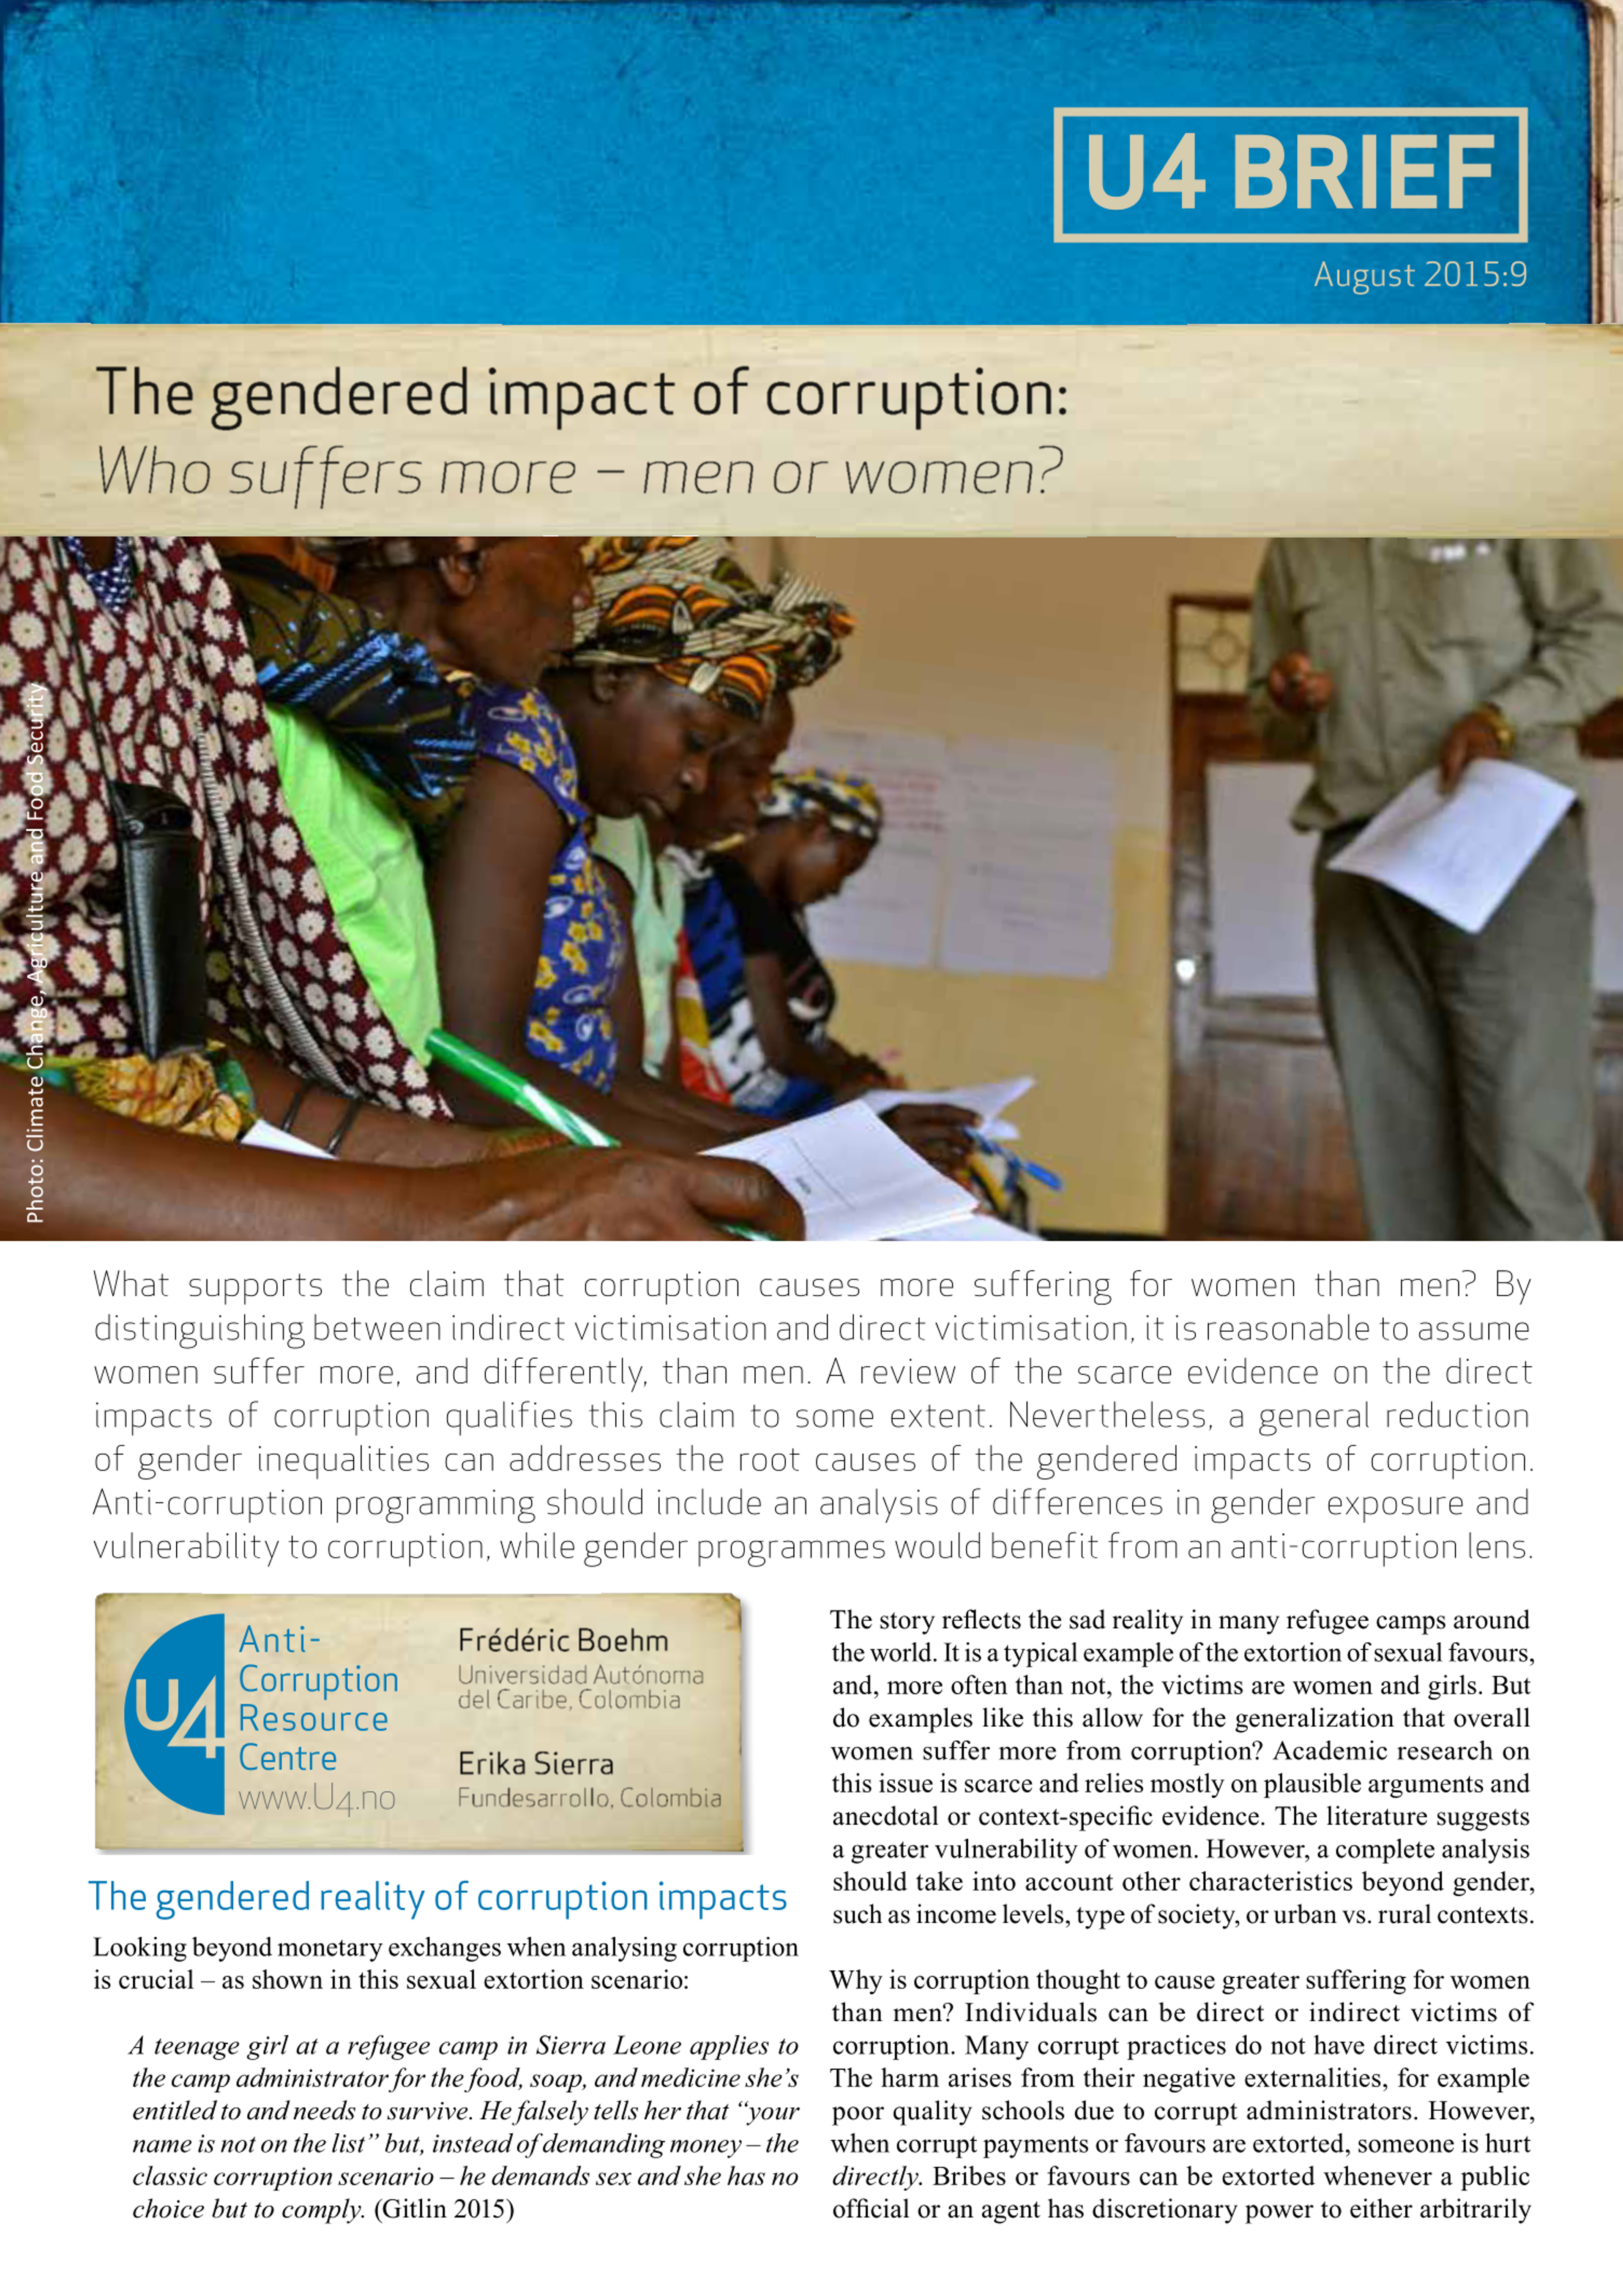 The gendered impact of corruption: Who suffers more – men or women?